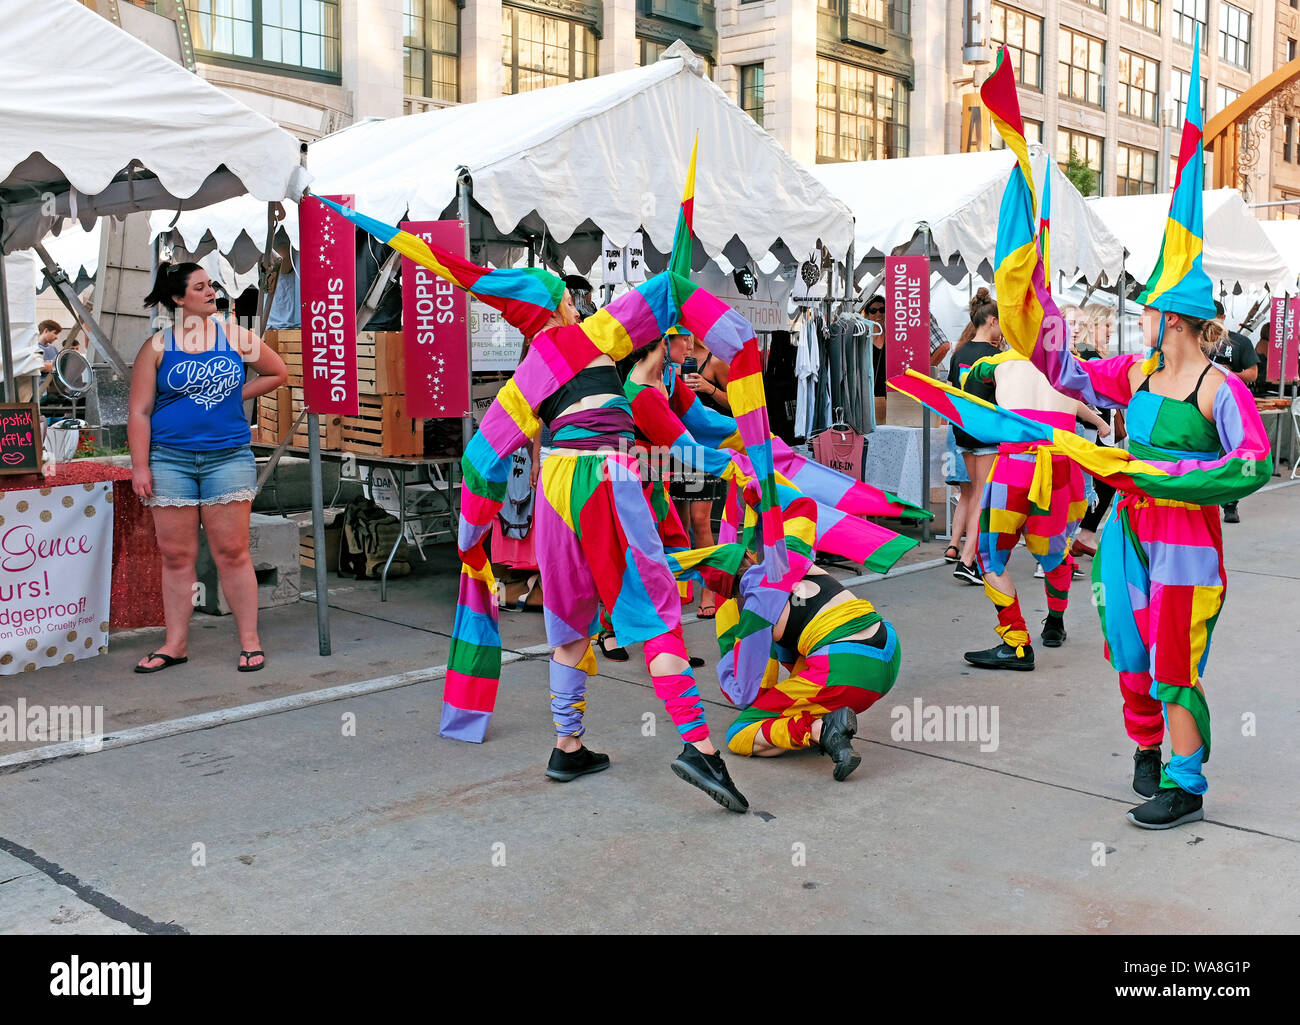 Colorful and surreal street troupe perform during the 2018 Tri-C Jazz Festival in the Playhouse Square Theater district of Cleveland, Ohio, USA. Stock Photo